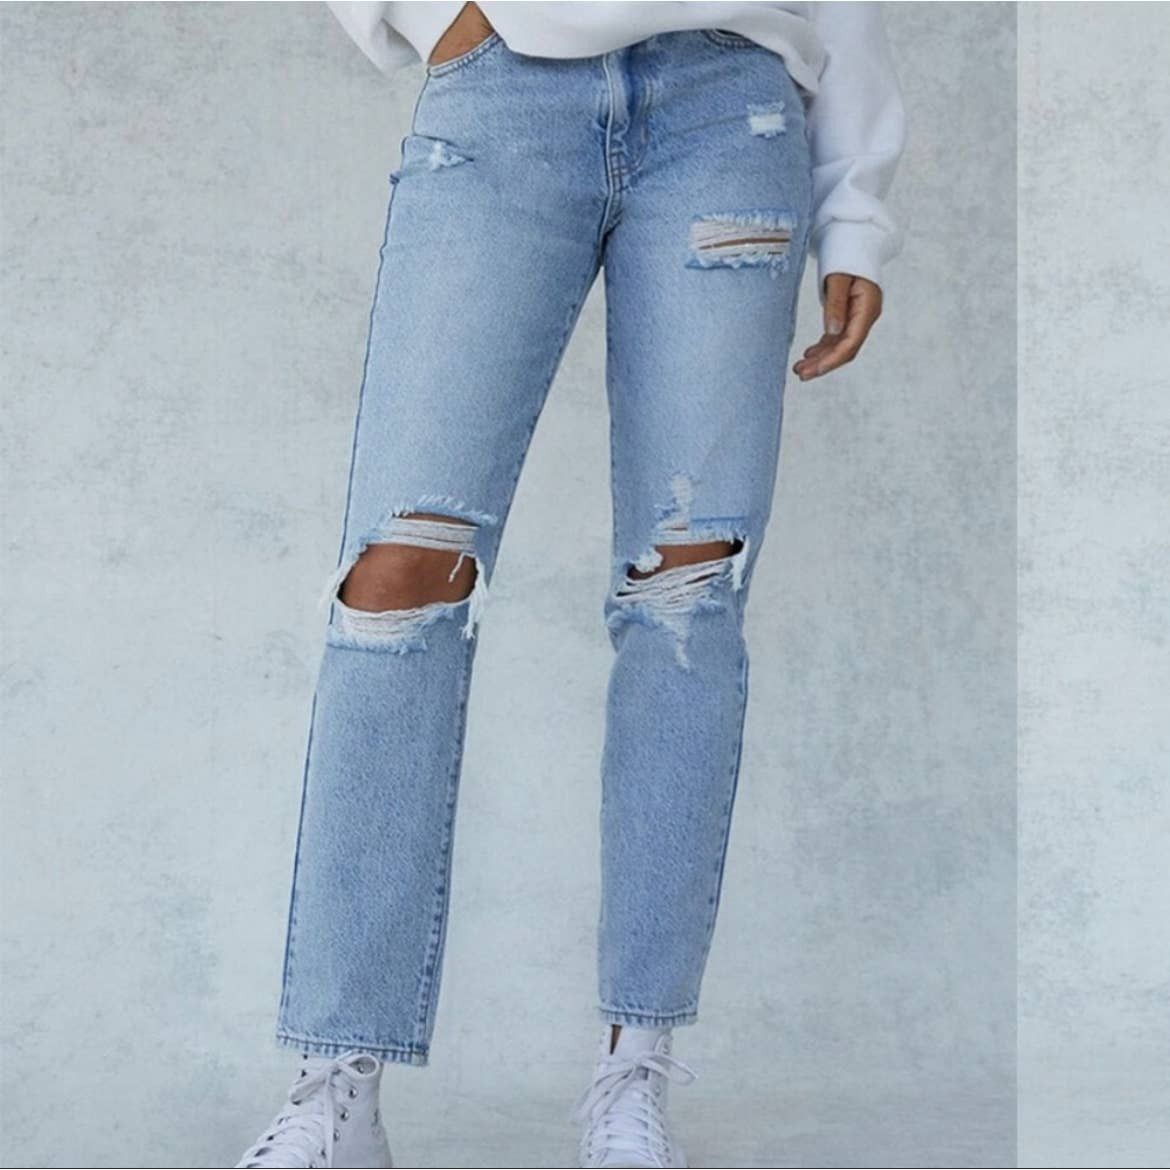 Pacsun Pacsun light blue distressed mom Jeans 22 Size 22" - 1 Preview